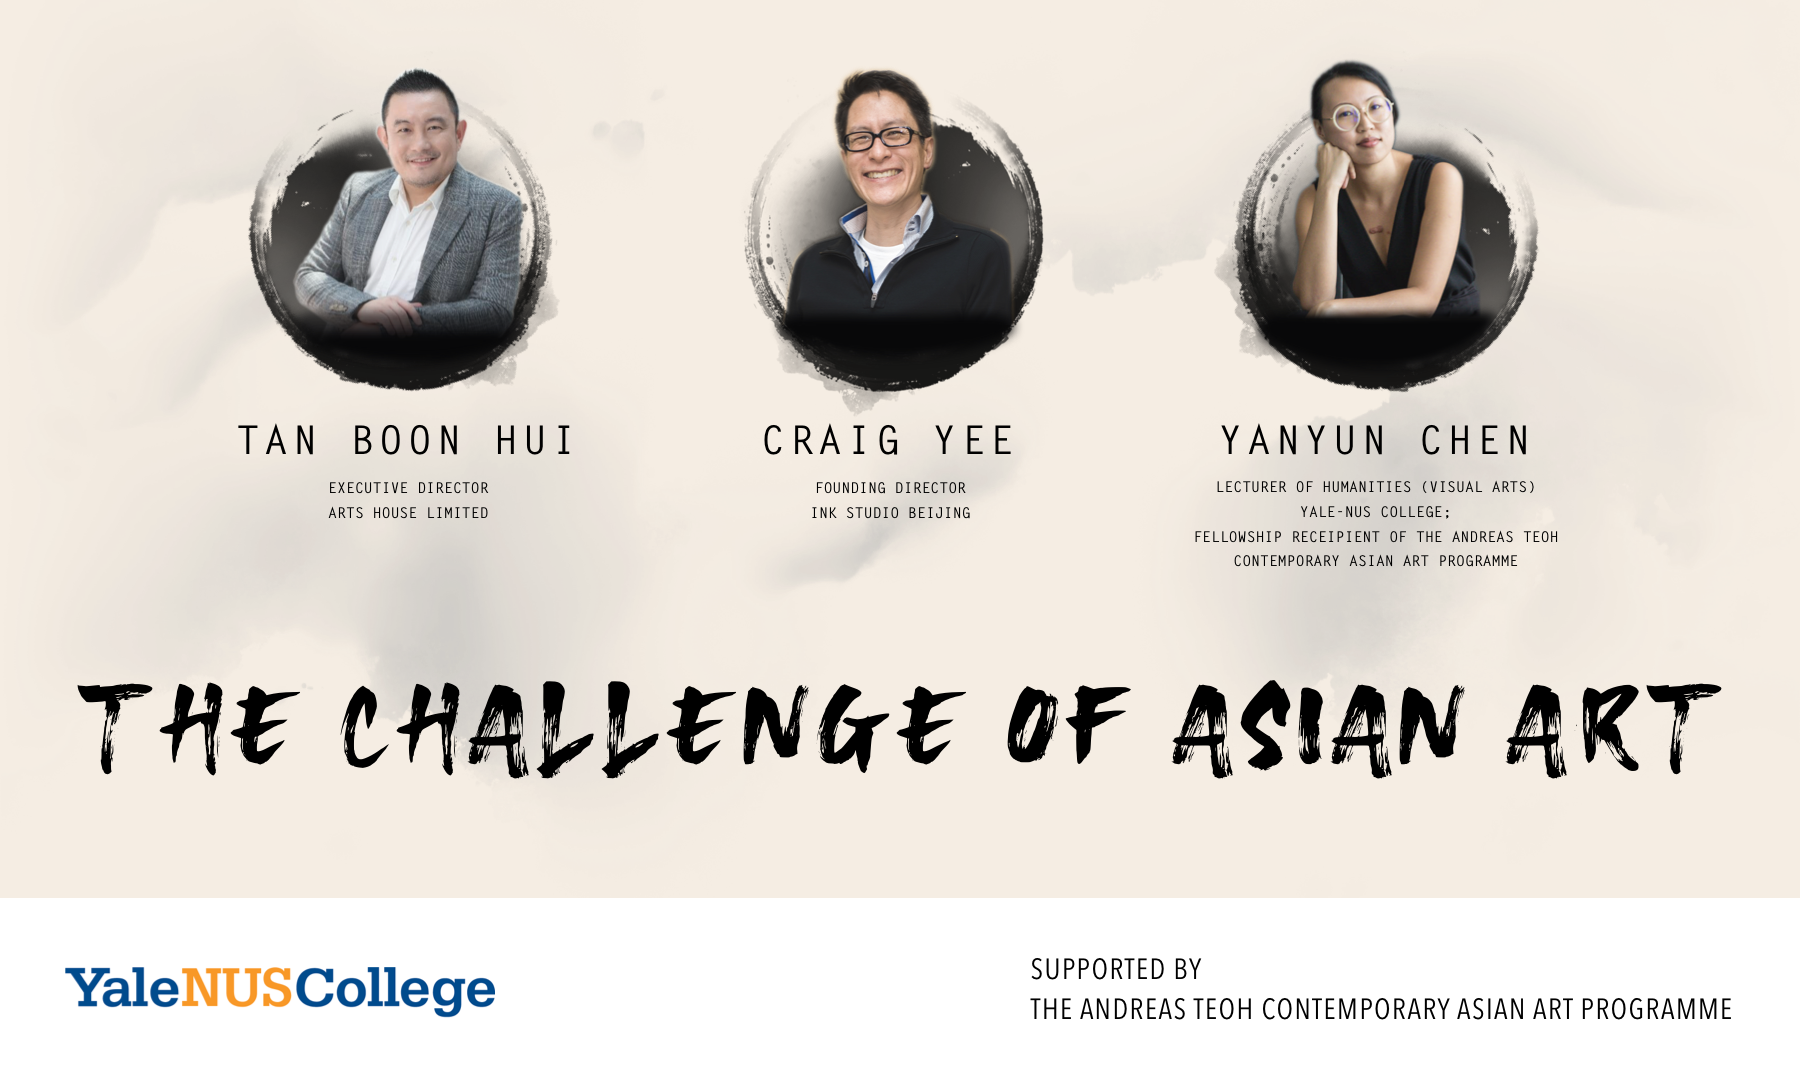 The Challenge of Asian Art